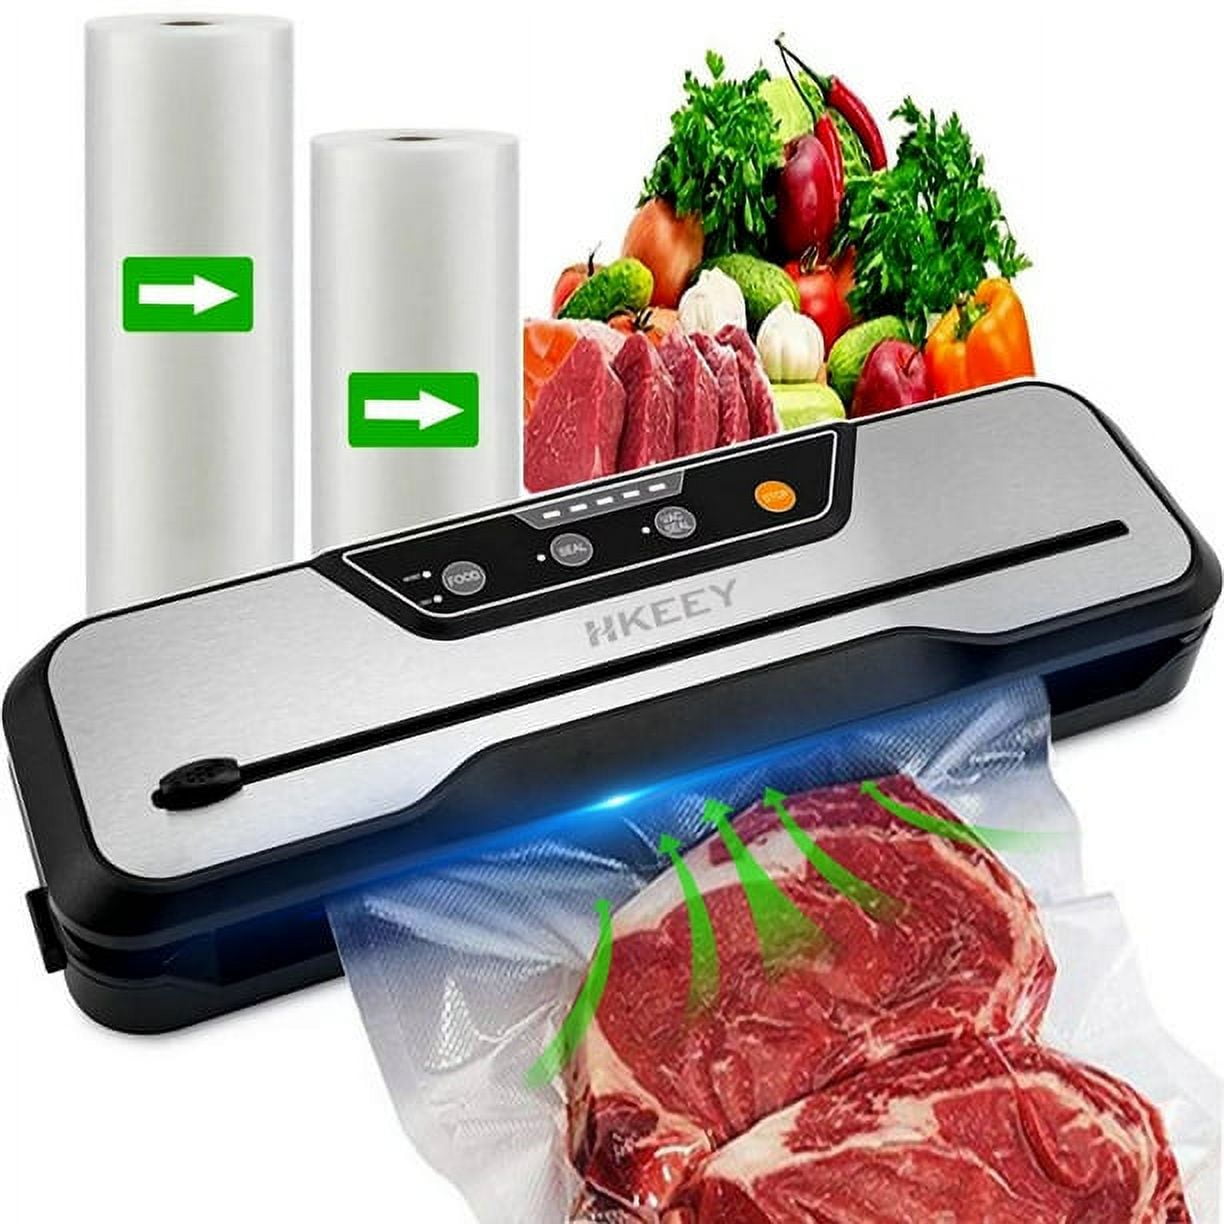 ADVENOR Vacuum Sealer Machine with Cutter Widened Double Sealing Strips and  Bag Storage, 85Kpa Dry Moist Food Modes Upgraded Locking Design Includes 2